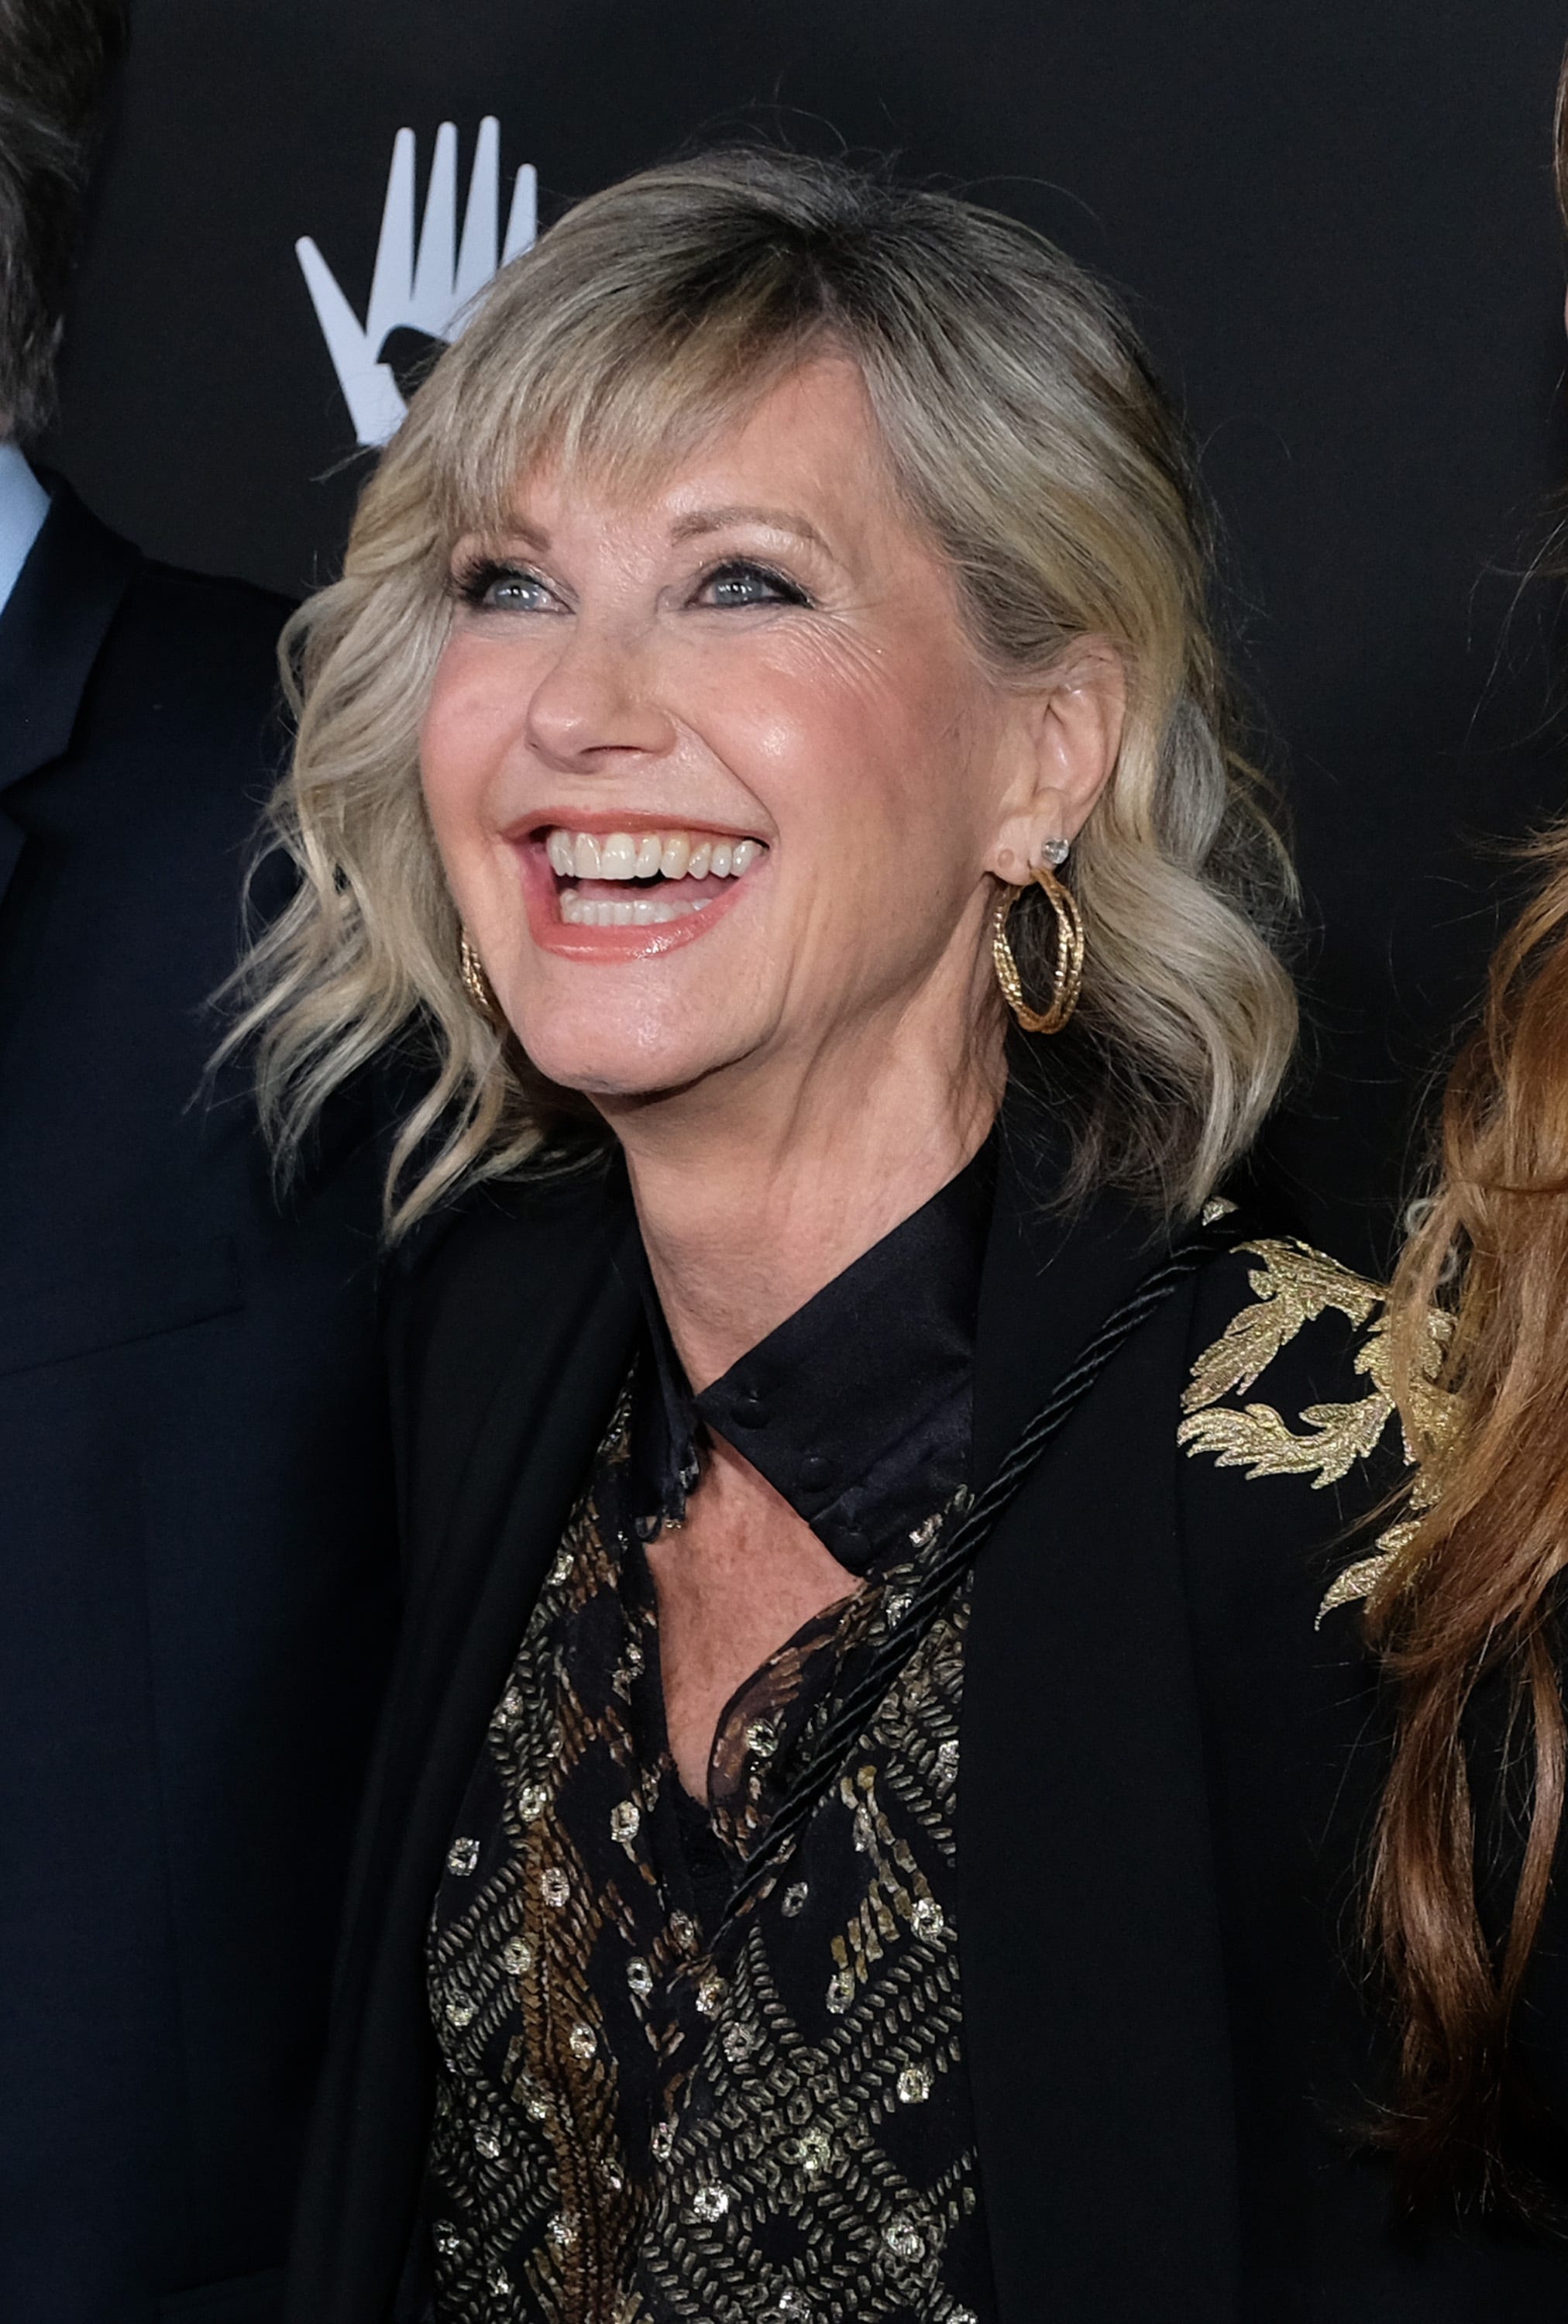 Olivia Newton-John dead Grease star dies at 73 after cancer battle